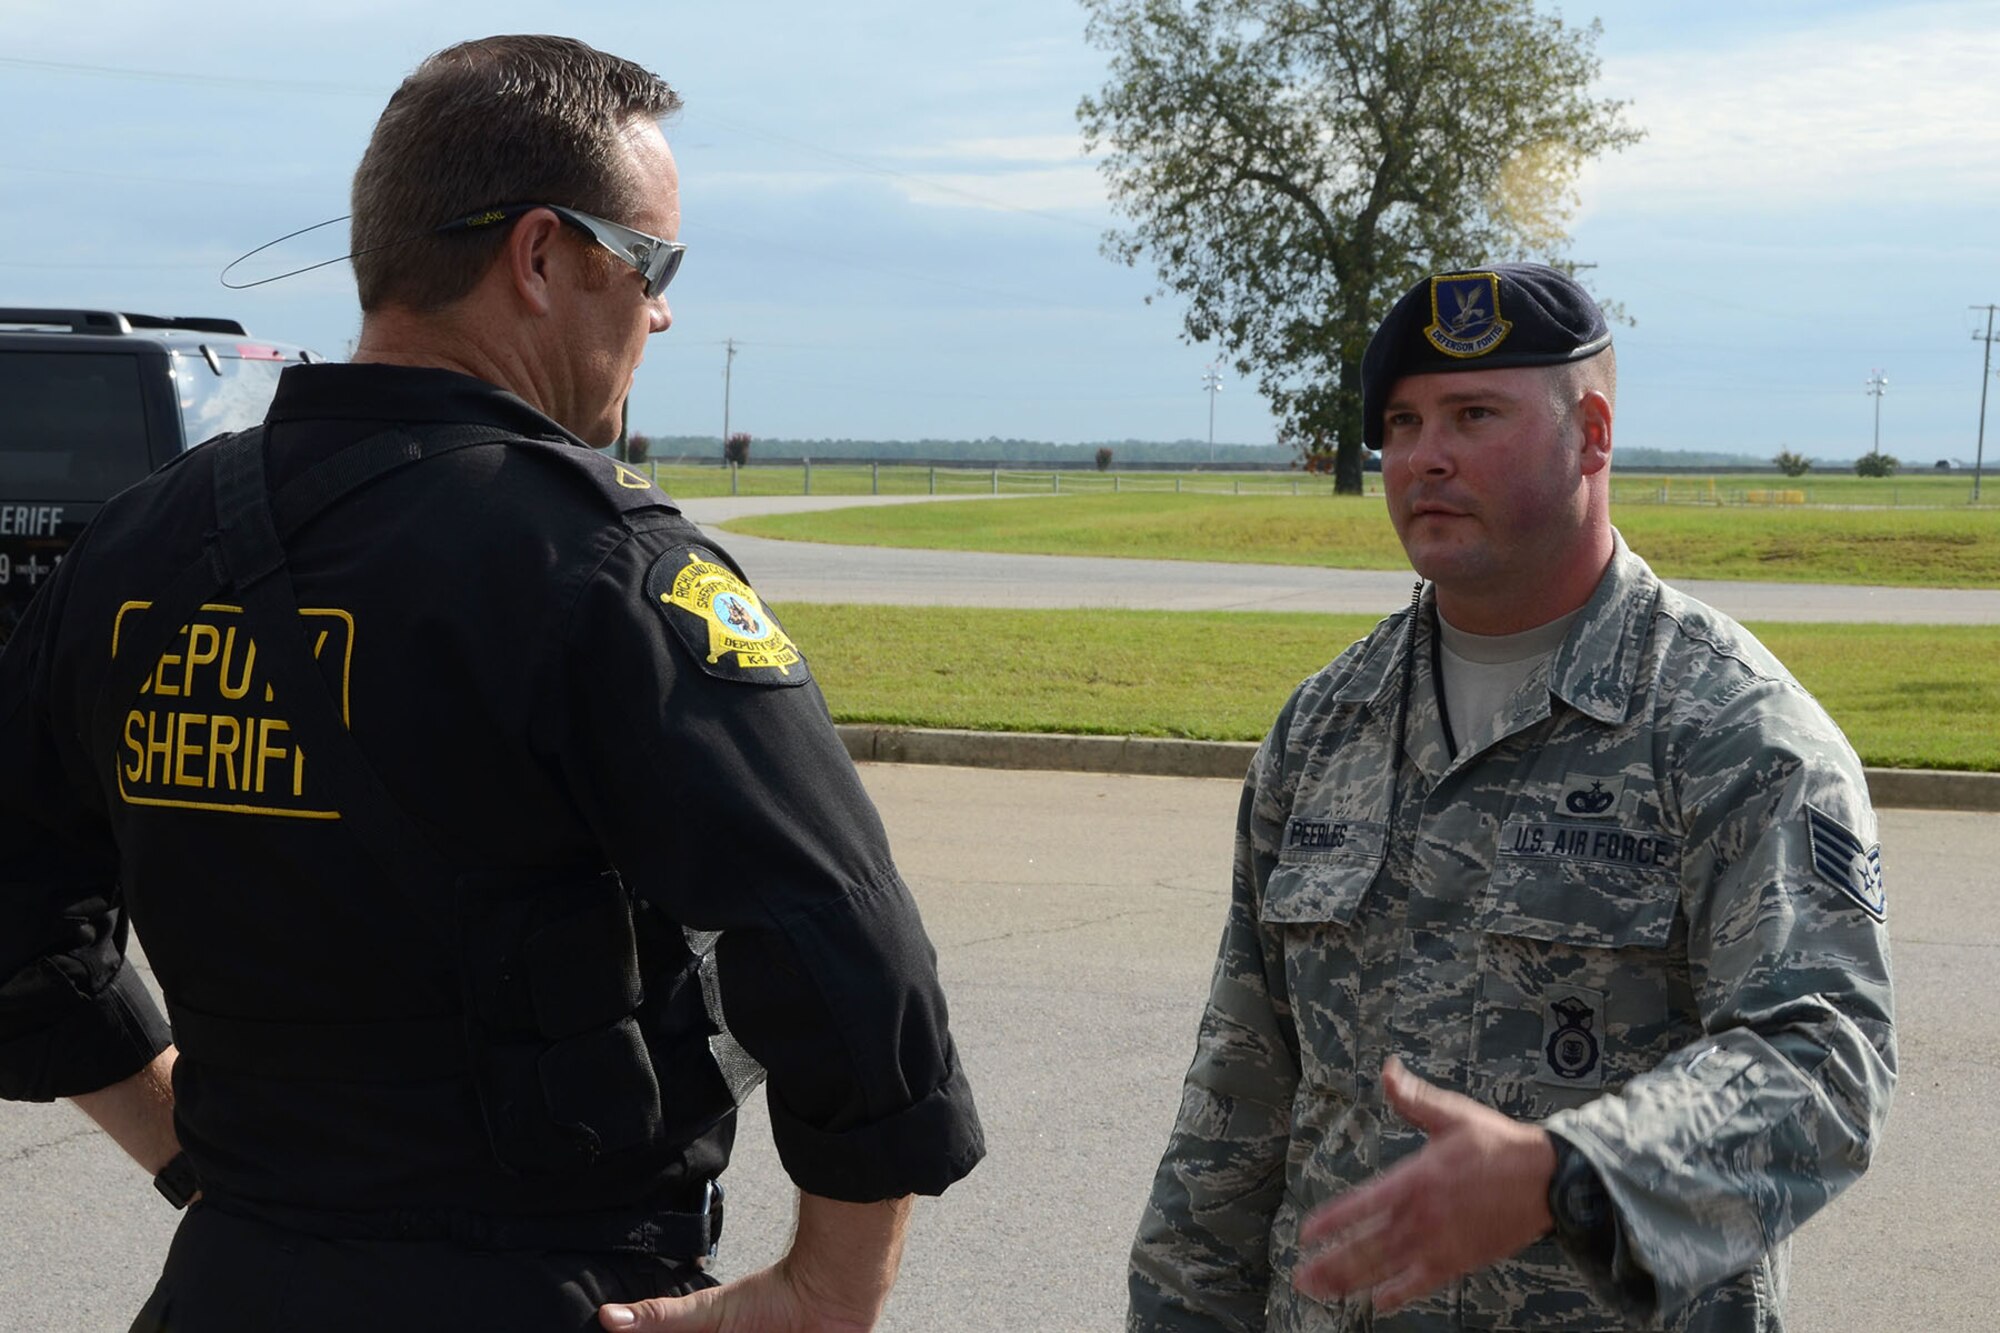 The South Carolina Air National Guard hosted an active shooter exercise combined with the Richland County Sheriff’s Department at McEntire Joint National Guard Base, Eastover, S.C., Aug. 20, 2015. The exercise scenario involved an incident where armed individuals attacked entrance points on base and due to limited personnel on-duty, Richland County responded to assist with K-9, SWAT and explosive ordnance disposal units. Responders tracked the assailants through the woods on base and eventually neutralized the threat. (U.S. Air National Guard photo by Senior Master Sgt. Edward Snyder/RELEASED)